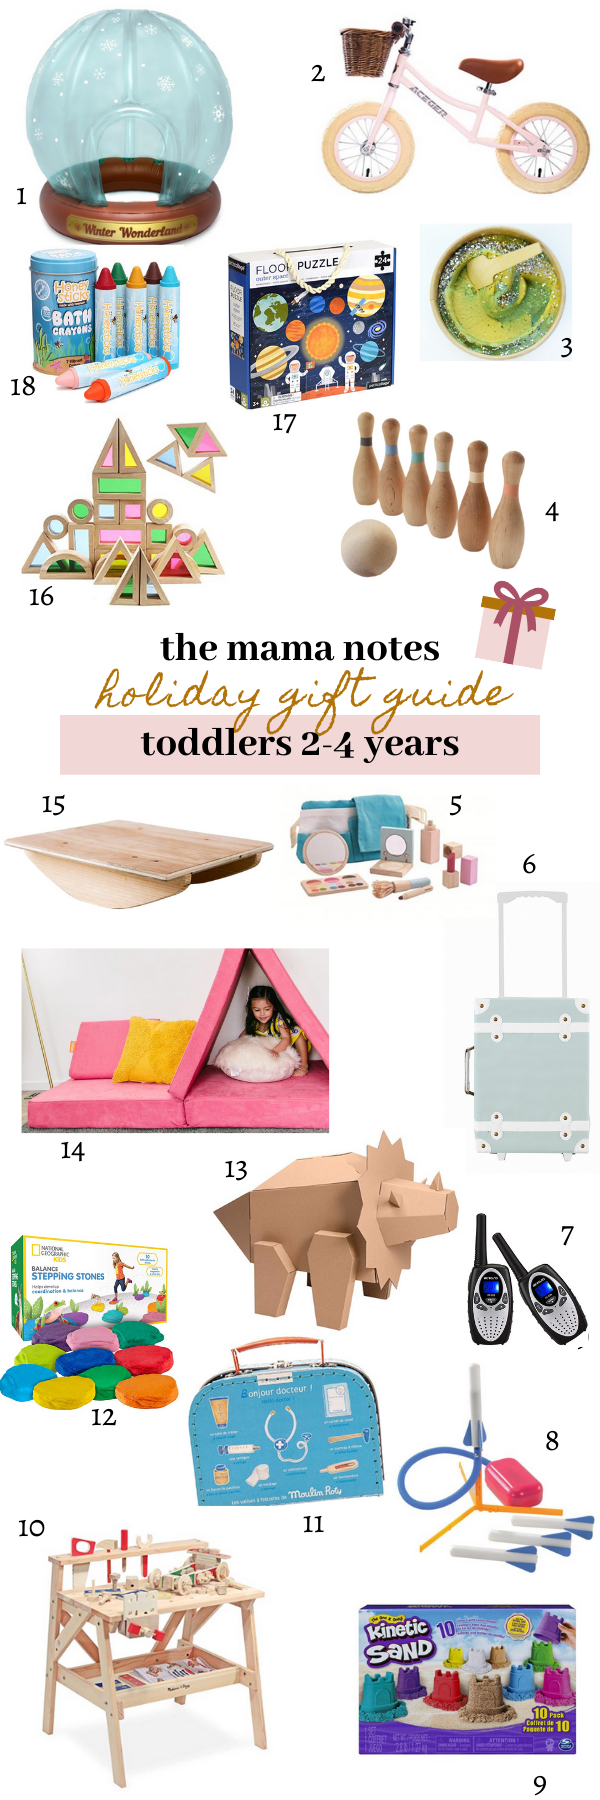 https://themamanotes.com/wp-content/uploads/2019/11/holiday-gift-guide-2-4-year-old-toddlers.png